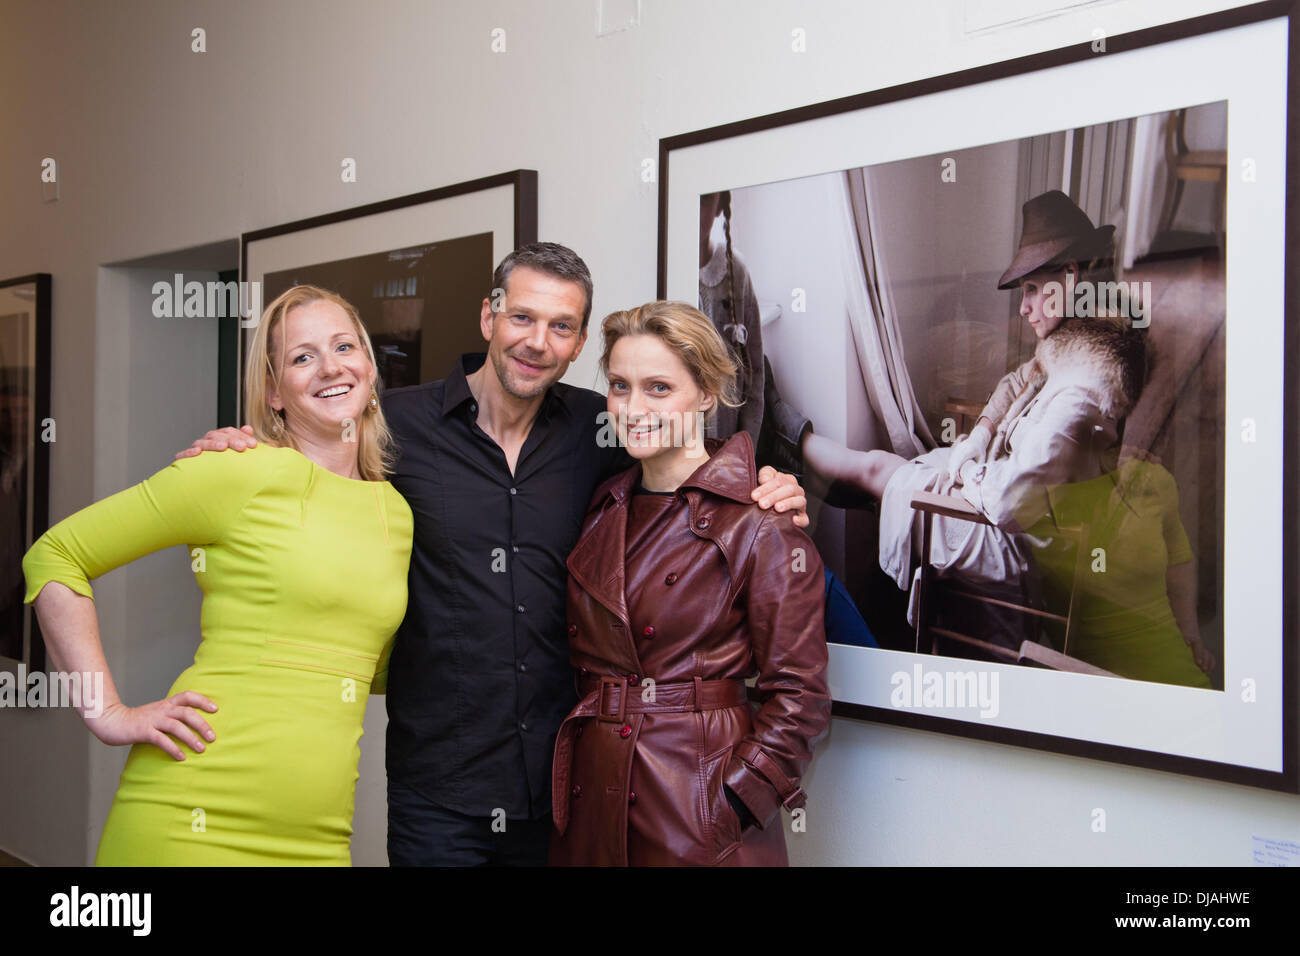 Jenny Falckenberg, Kai Wiesinger and Catherine Flemming at the opening of the photo exhibition 'Dialog der Geschichte' with photos by German actor Kai Wiesinger and director Franziska Stuenkel at the Ehemaligen Standortkommandantur der Bundeswehr. Hamburg, Germany - 21.03.2012 **Not available for publication in Singapore** Creidt: Eva Napp/WENN.com Stock Photo